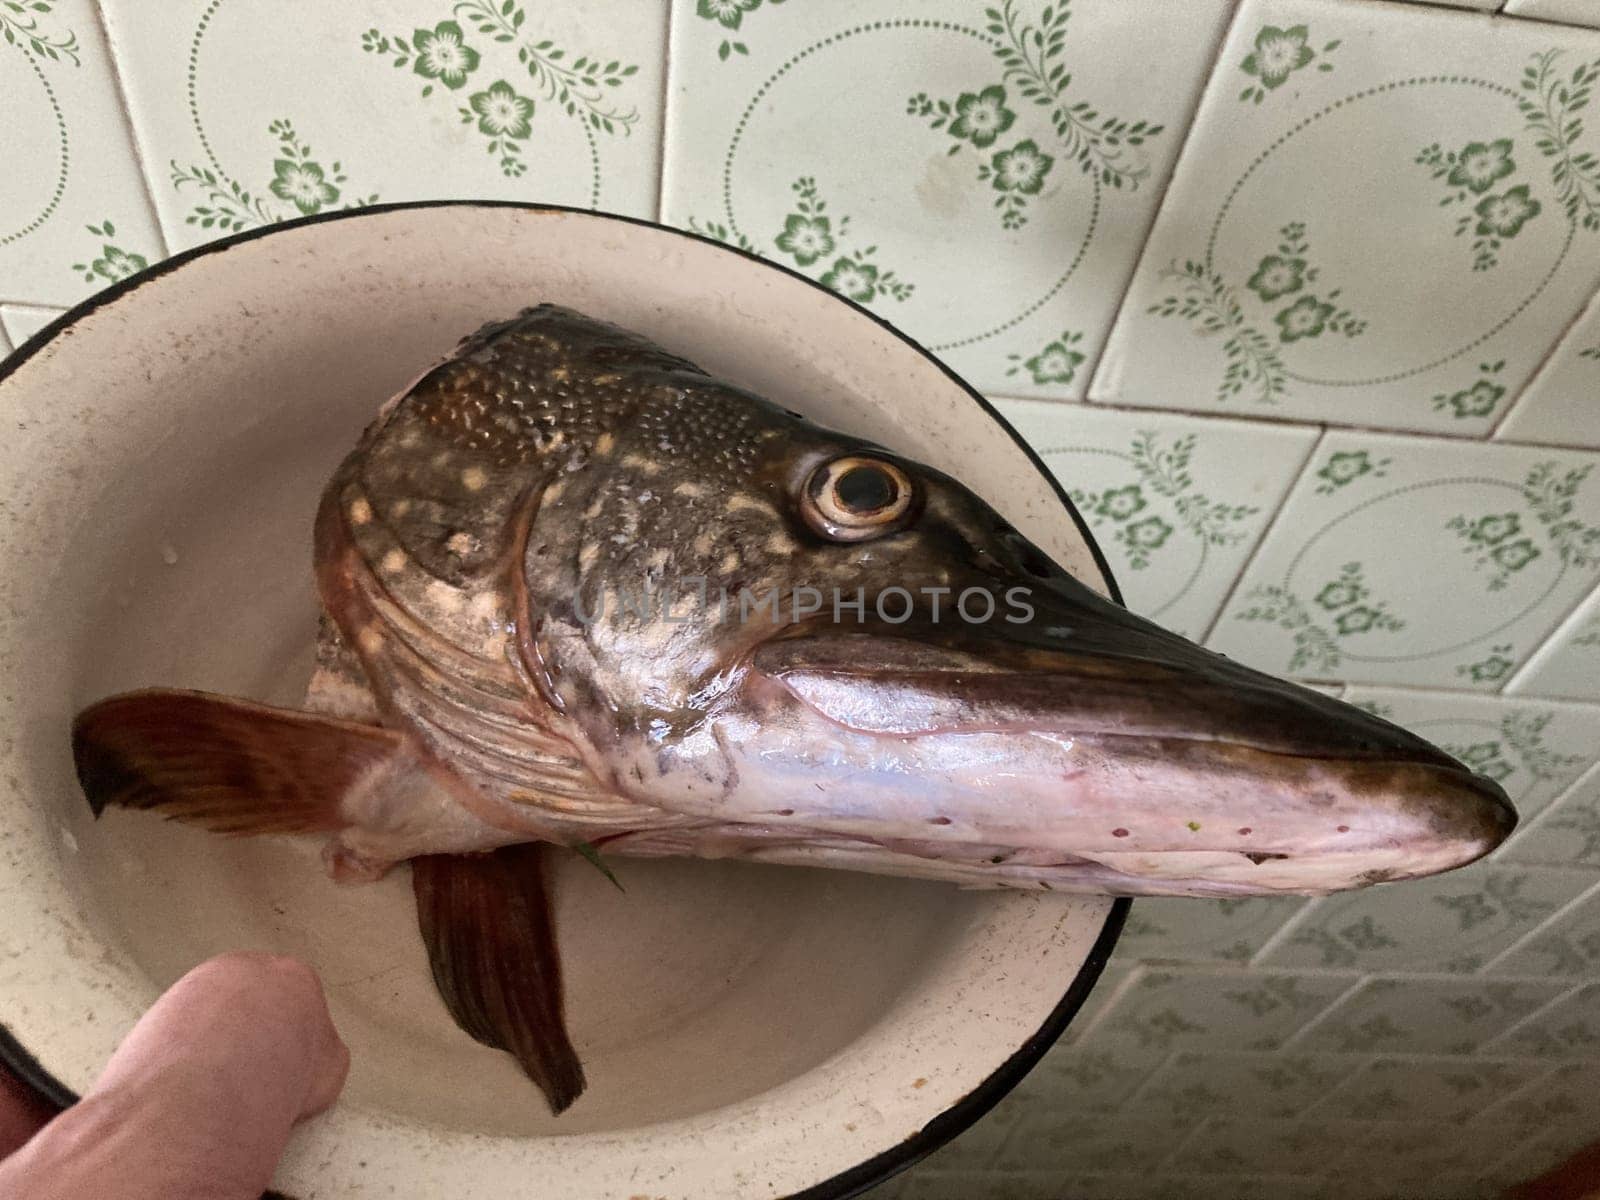 Severed head of a large pike by architectphd